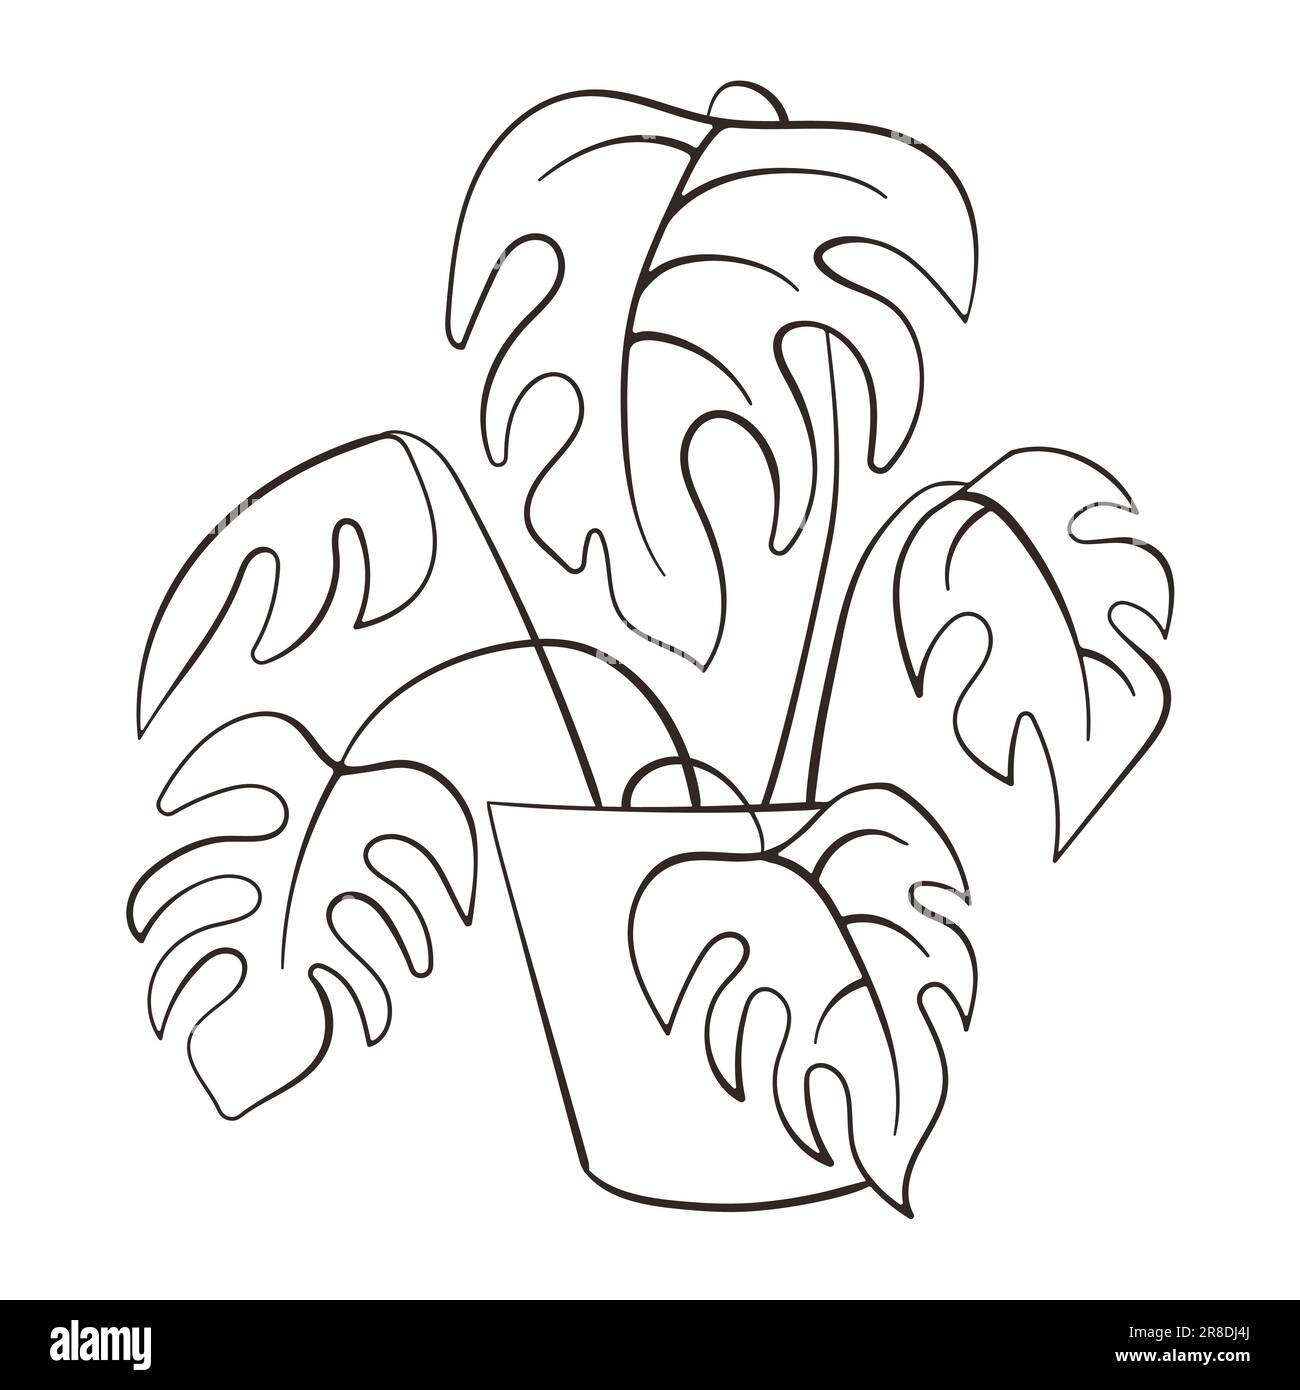 Share 144+ plant drawing images latest